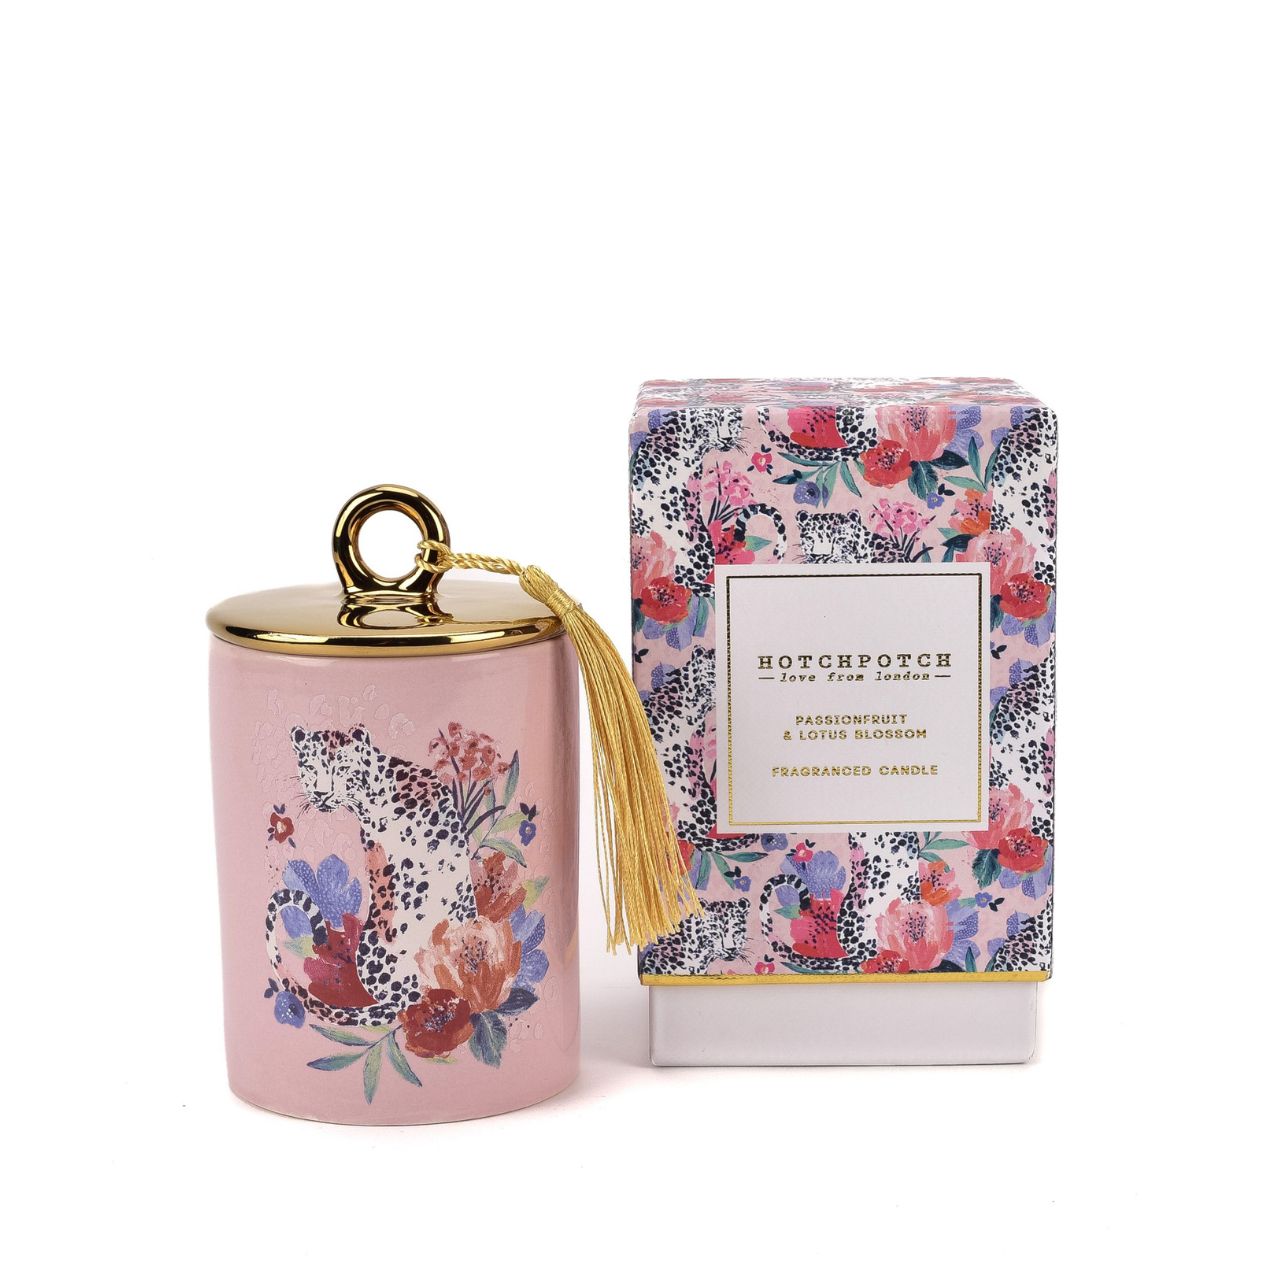 Candle Passionfruit & Lotus Blossom by Frida Big Cat 270g  This sweet-scented passionfruit and lotus blossom candle is the perfect gift for big cat lovers. Completed with a vibrant ceramic holder, this decorative item adds a fun feel to any home.